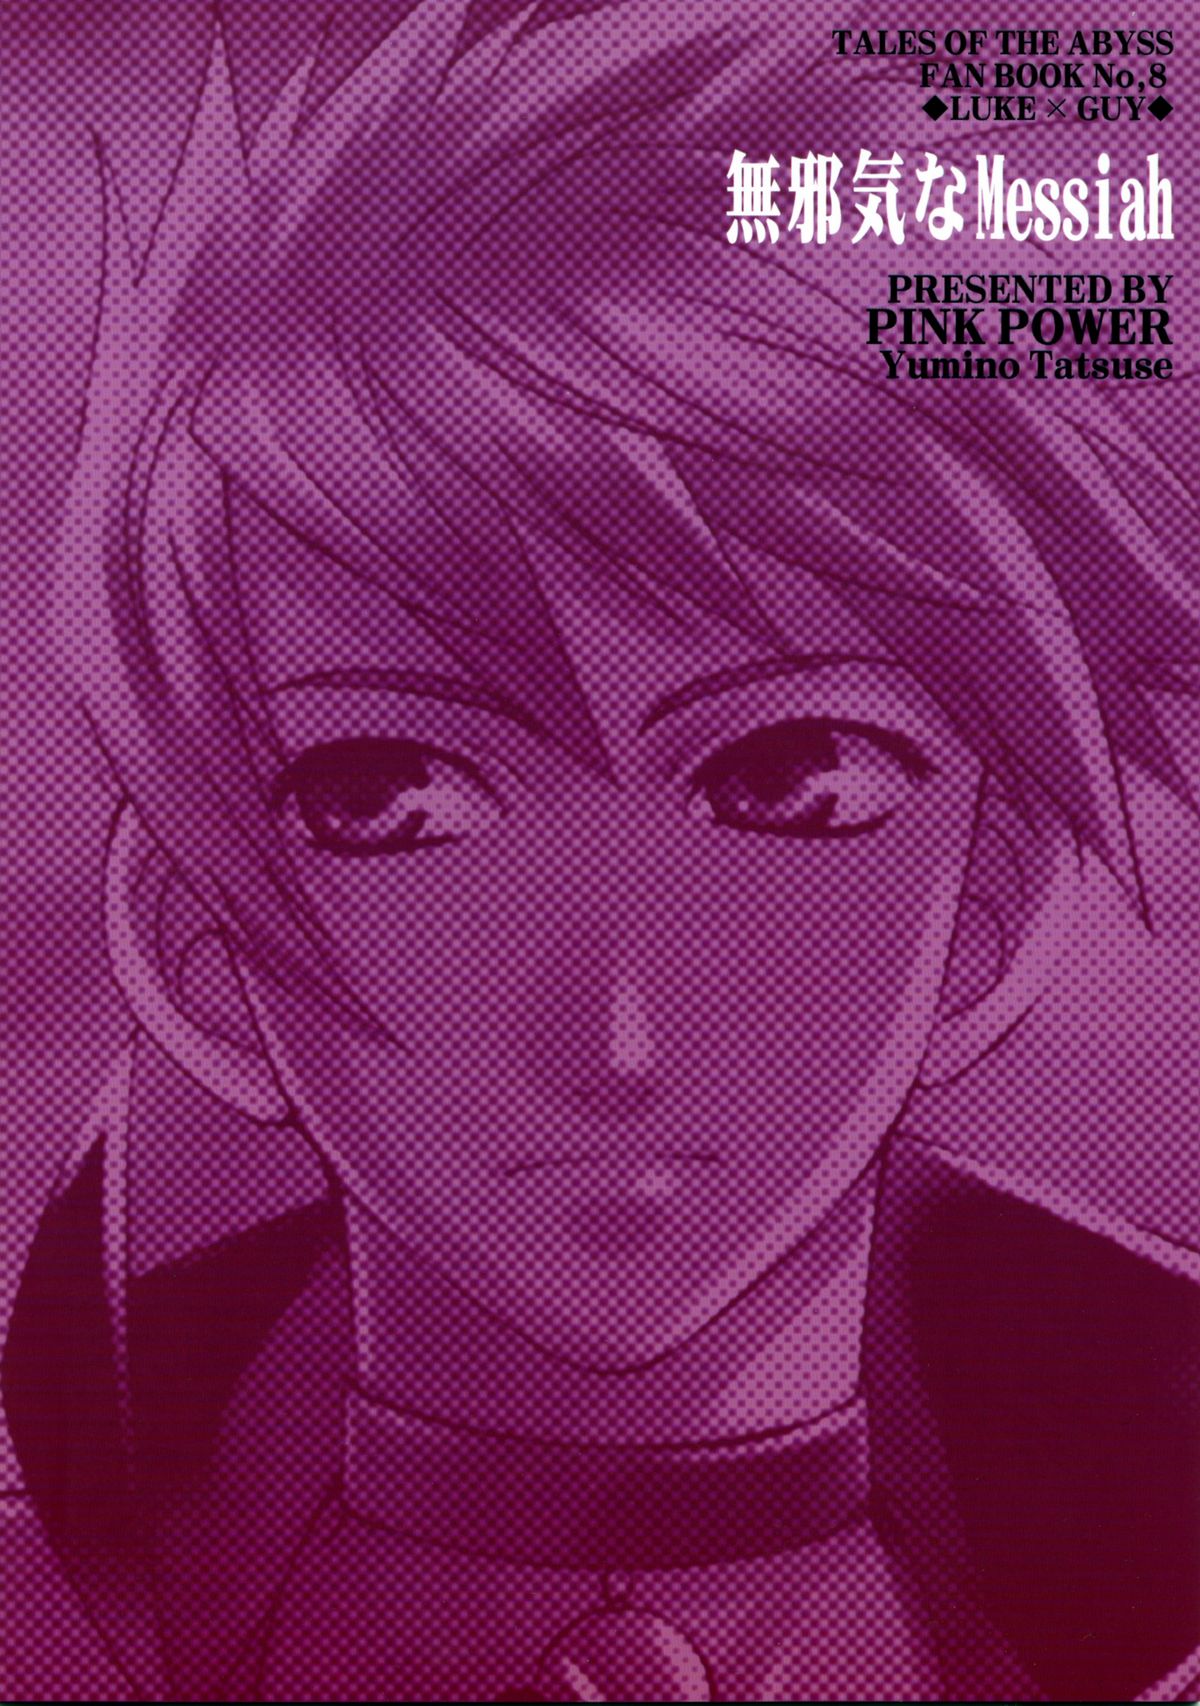 [PINK POWER] Mujaki na Messiah (tales of the abyss) page 11 full